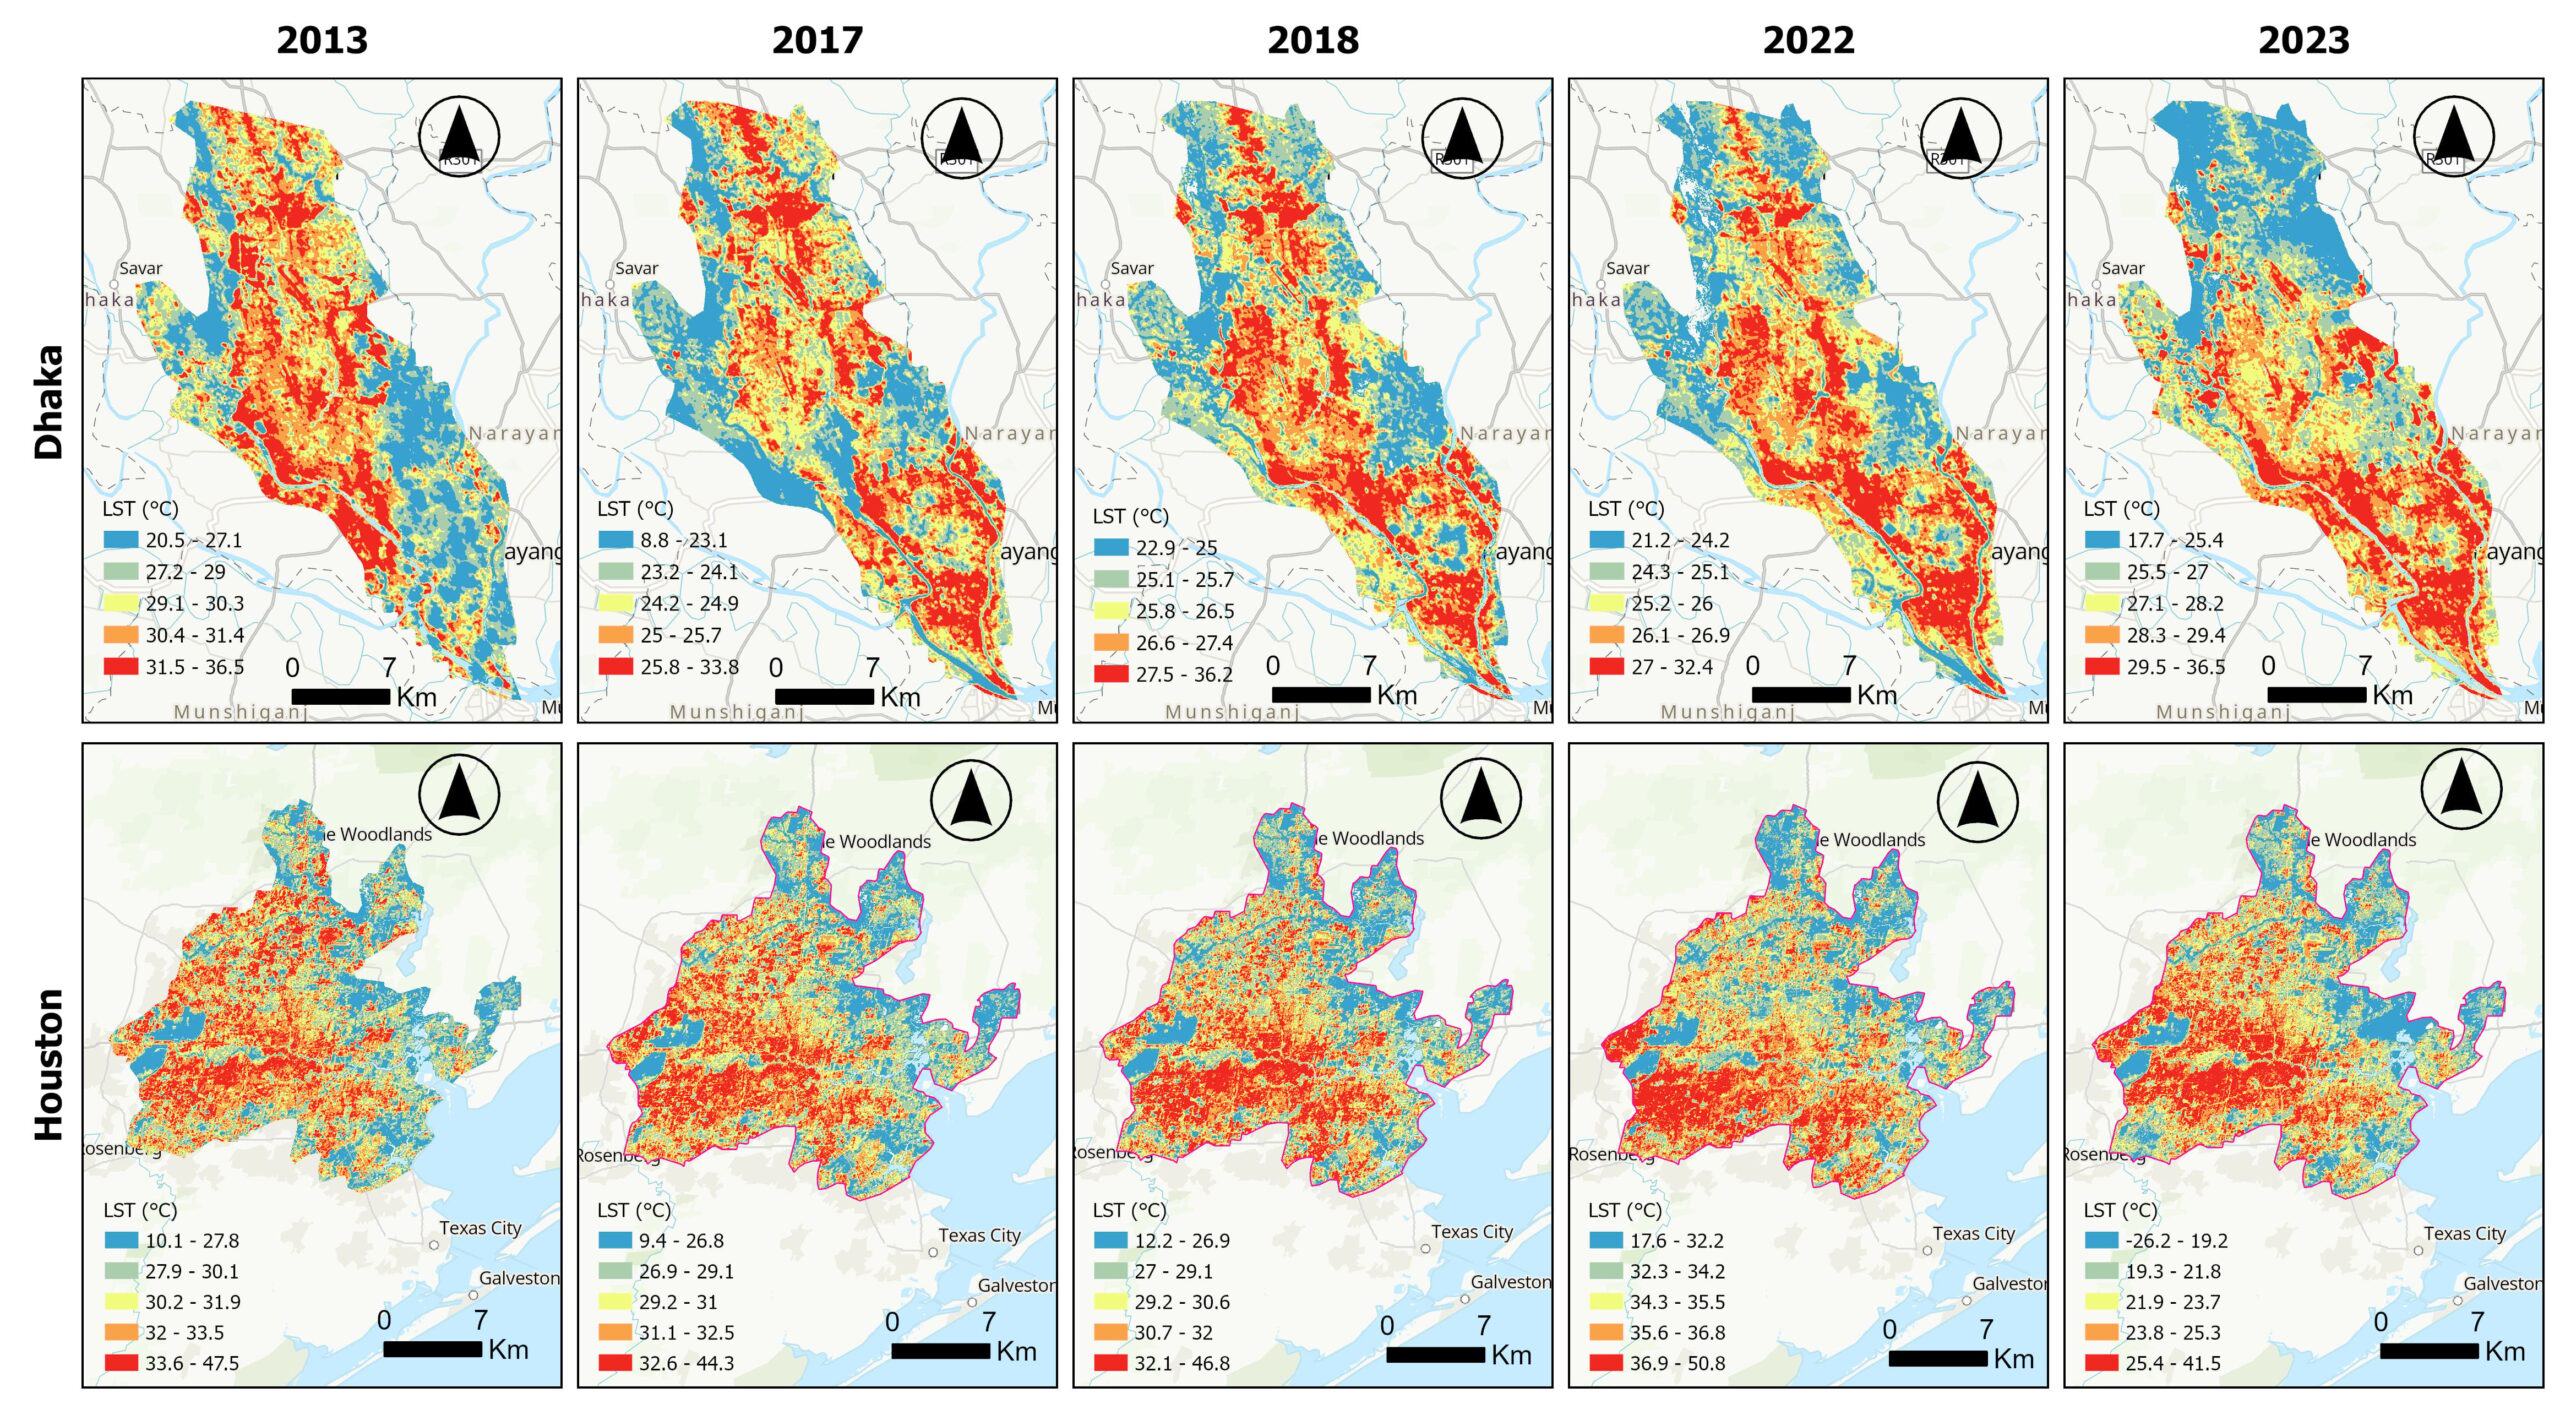 Changes in land surface temperature in Dhaka and Houston between 2013 and 2023